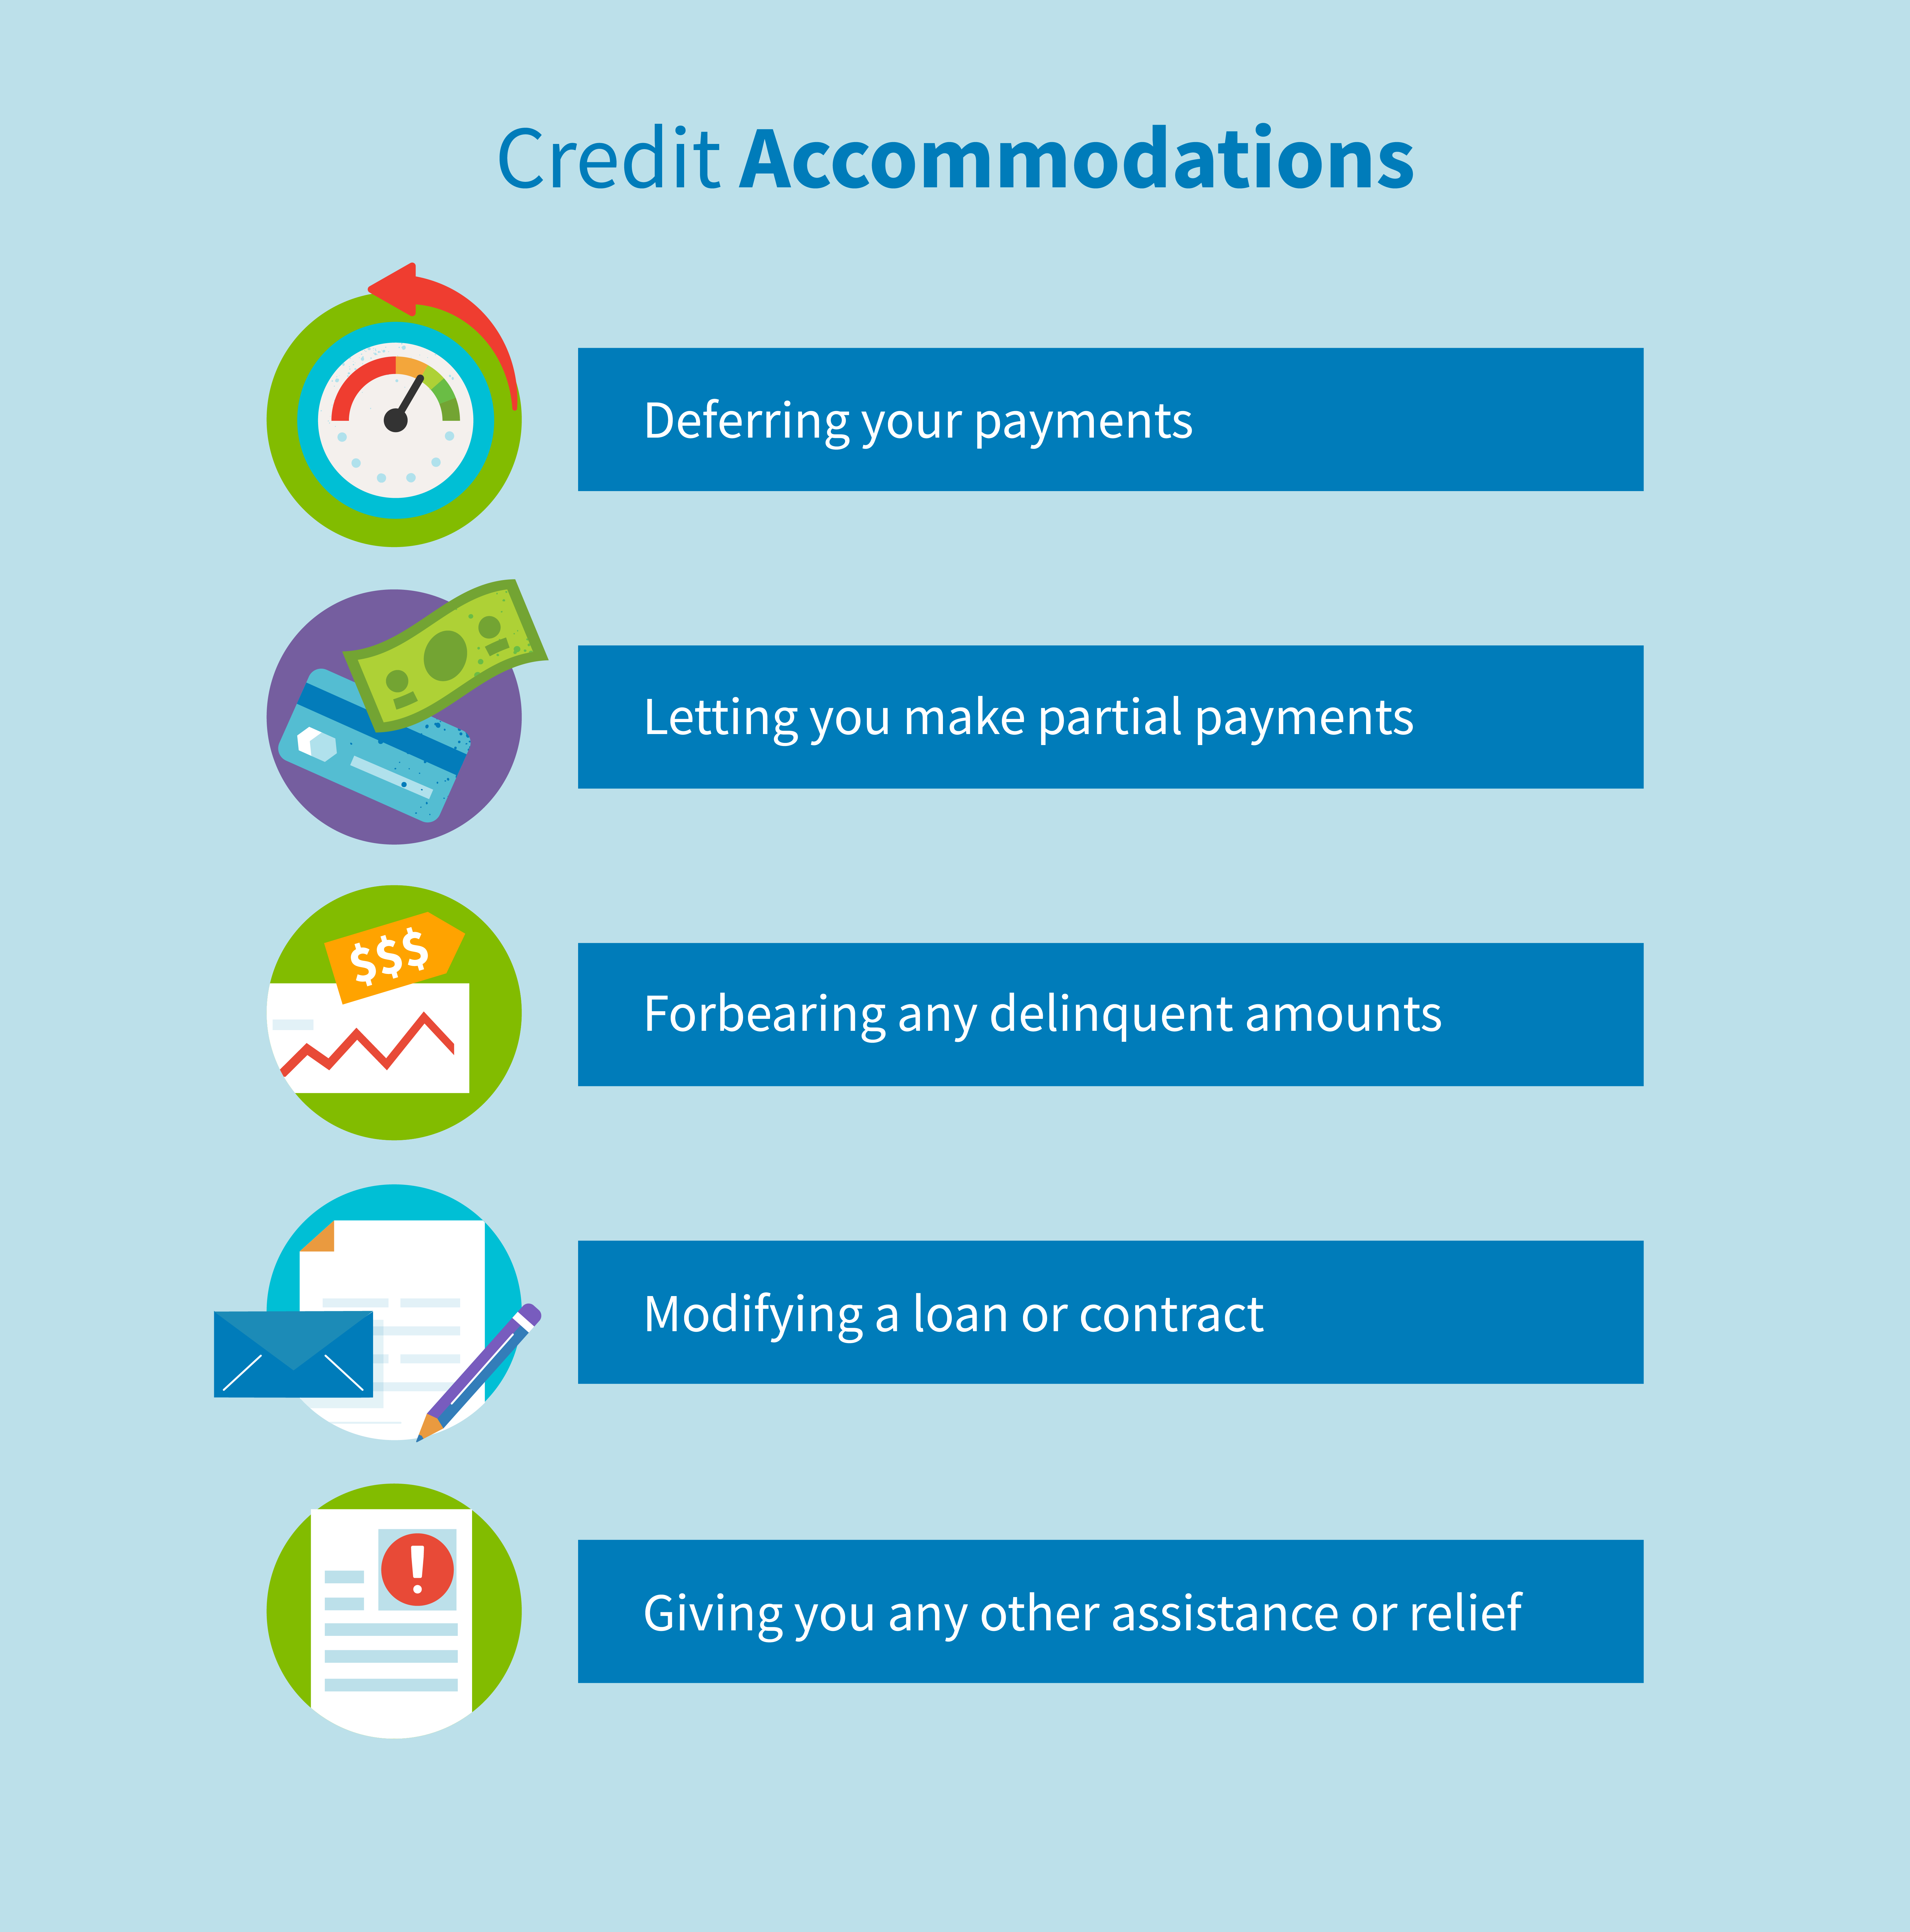 Credit accommodations can be made for deferred payments, permitted partial payments, forbearance for any delinquent amounts, a modified loan or contract, as well as other assistance.